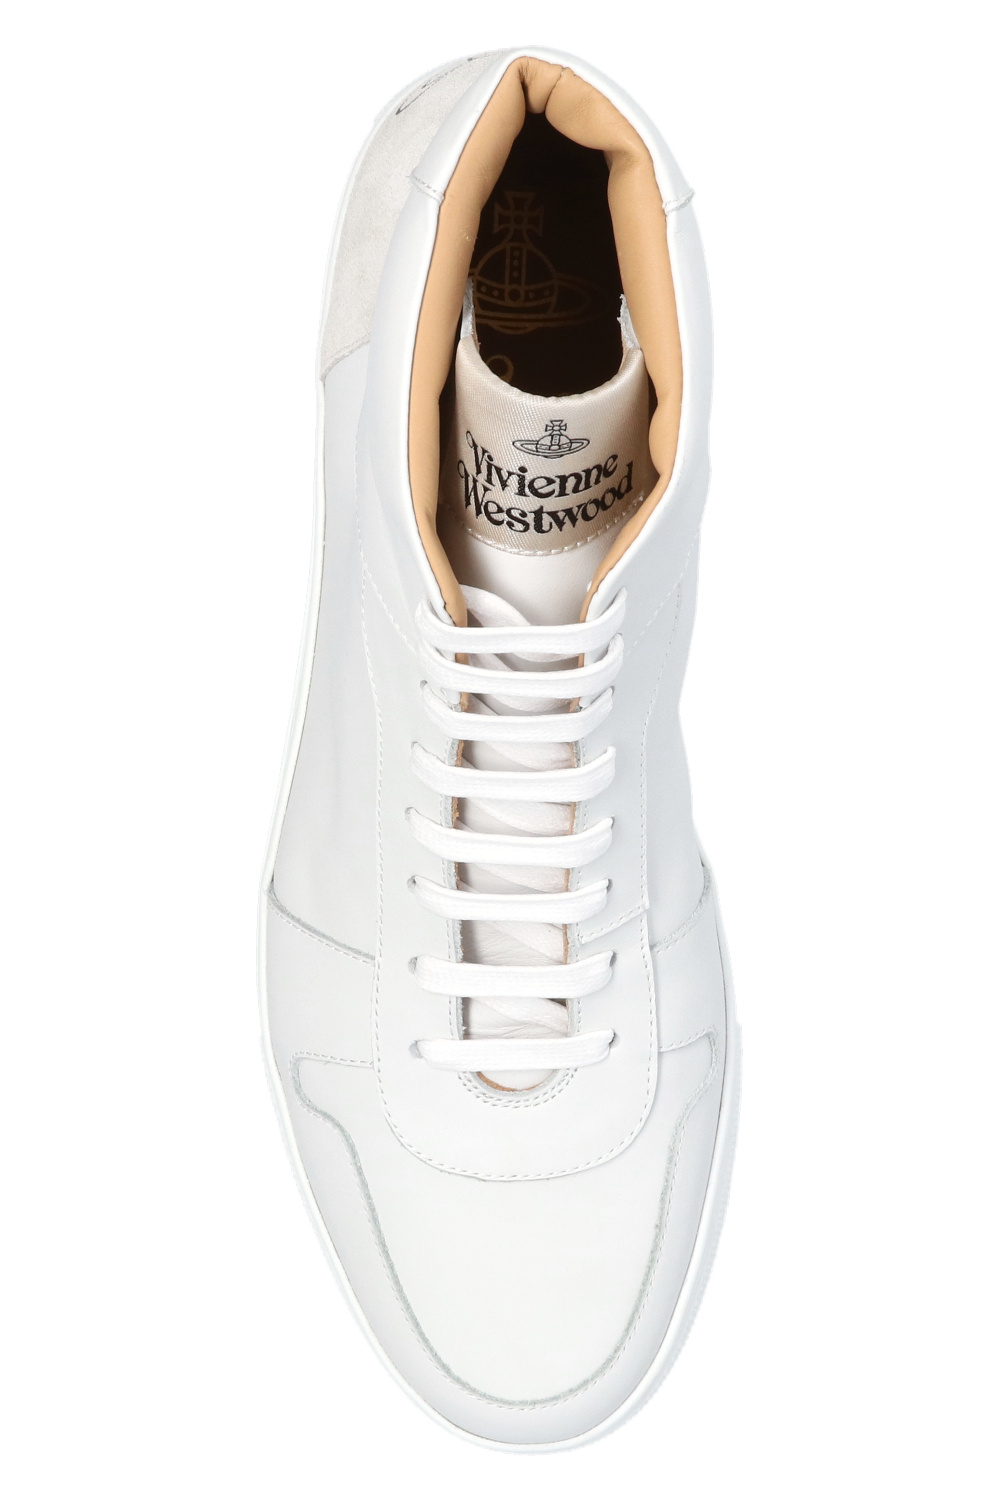 Vivienne Westwood Apollo Leather Hi-top Trainers in White for Men Mens Shoes Trainers High-top trainers 